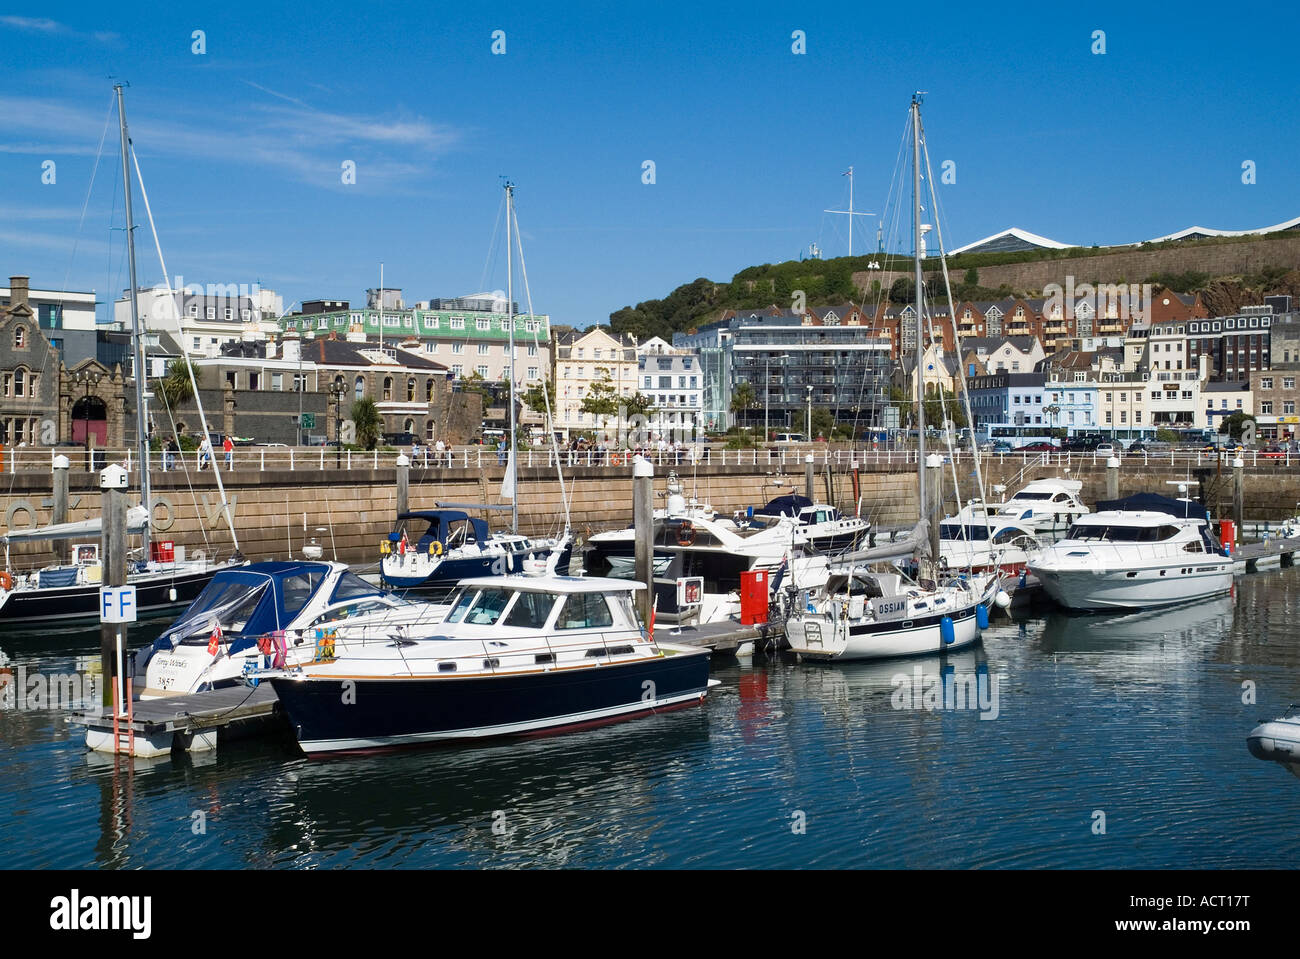 dh Albert Harbour ST HELIER JERSEY Yachts berthed alongside quay St Helier Marina channel islands uk Stock Photo